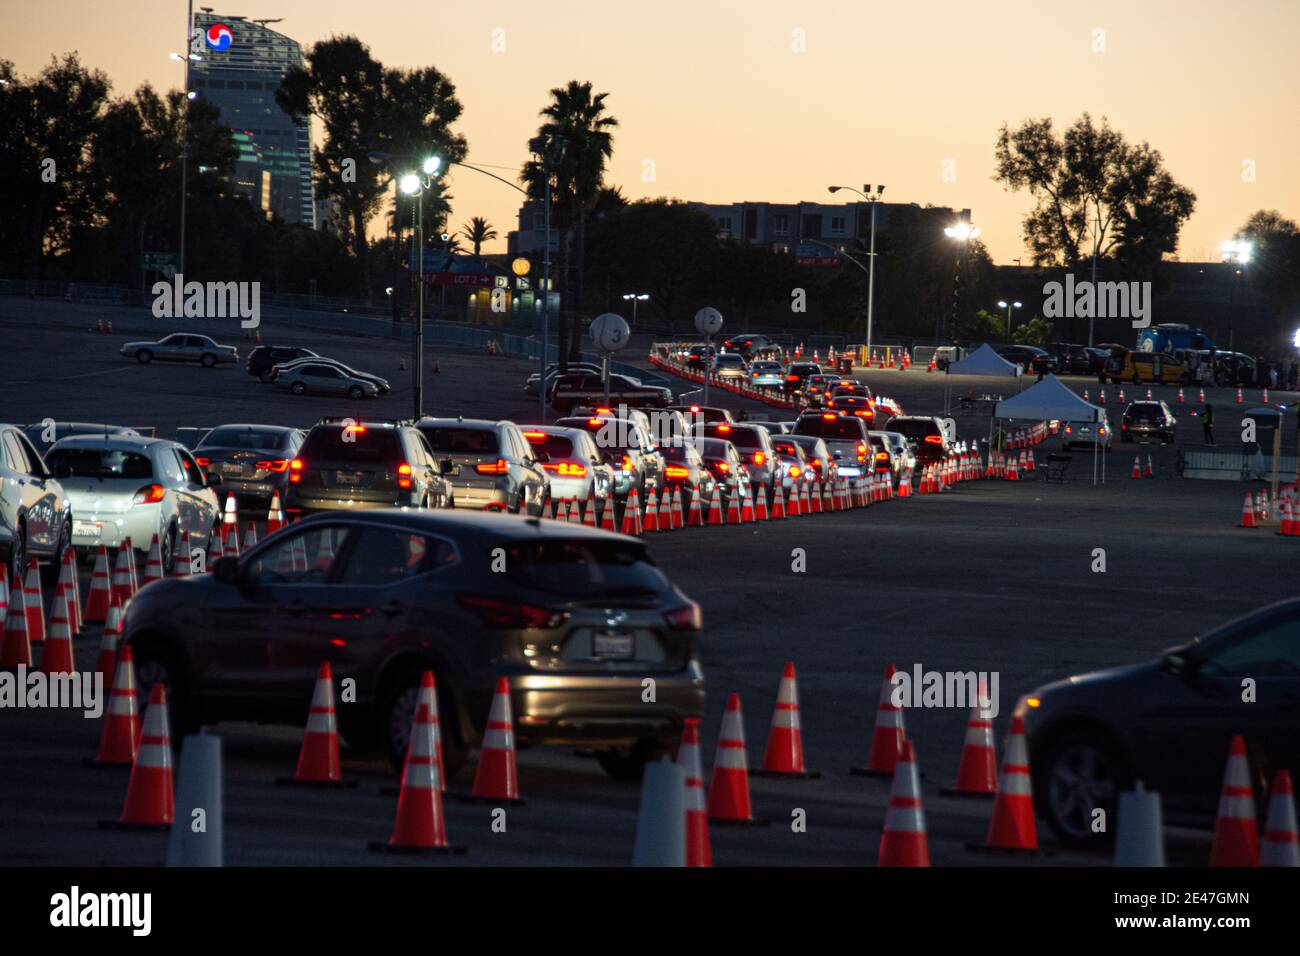 Covid tents and cars lined up with people waiting to get their COVID-19 vaccinations; Dodger Stadium, Los Angeles, CA USA. Stock Photo